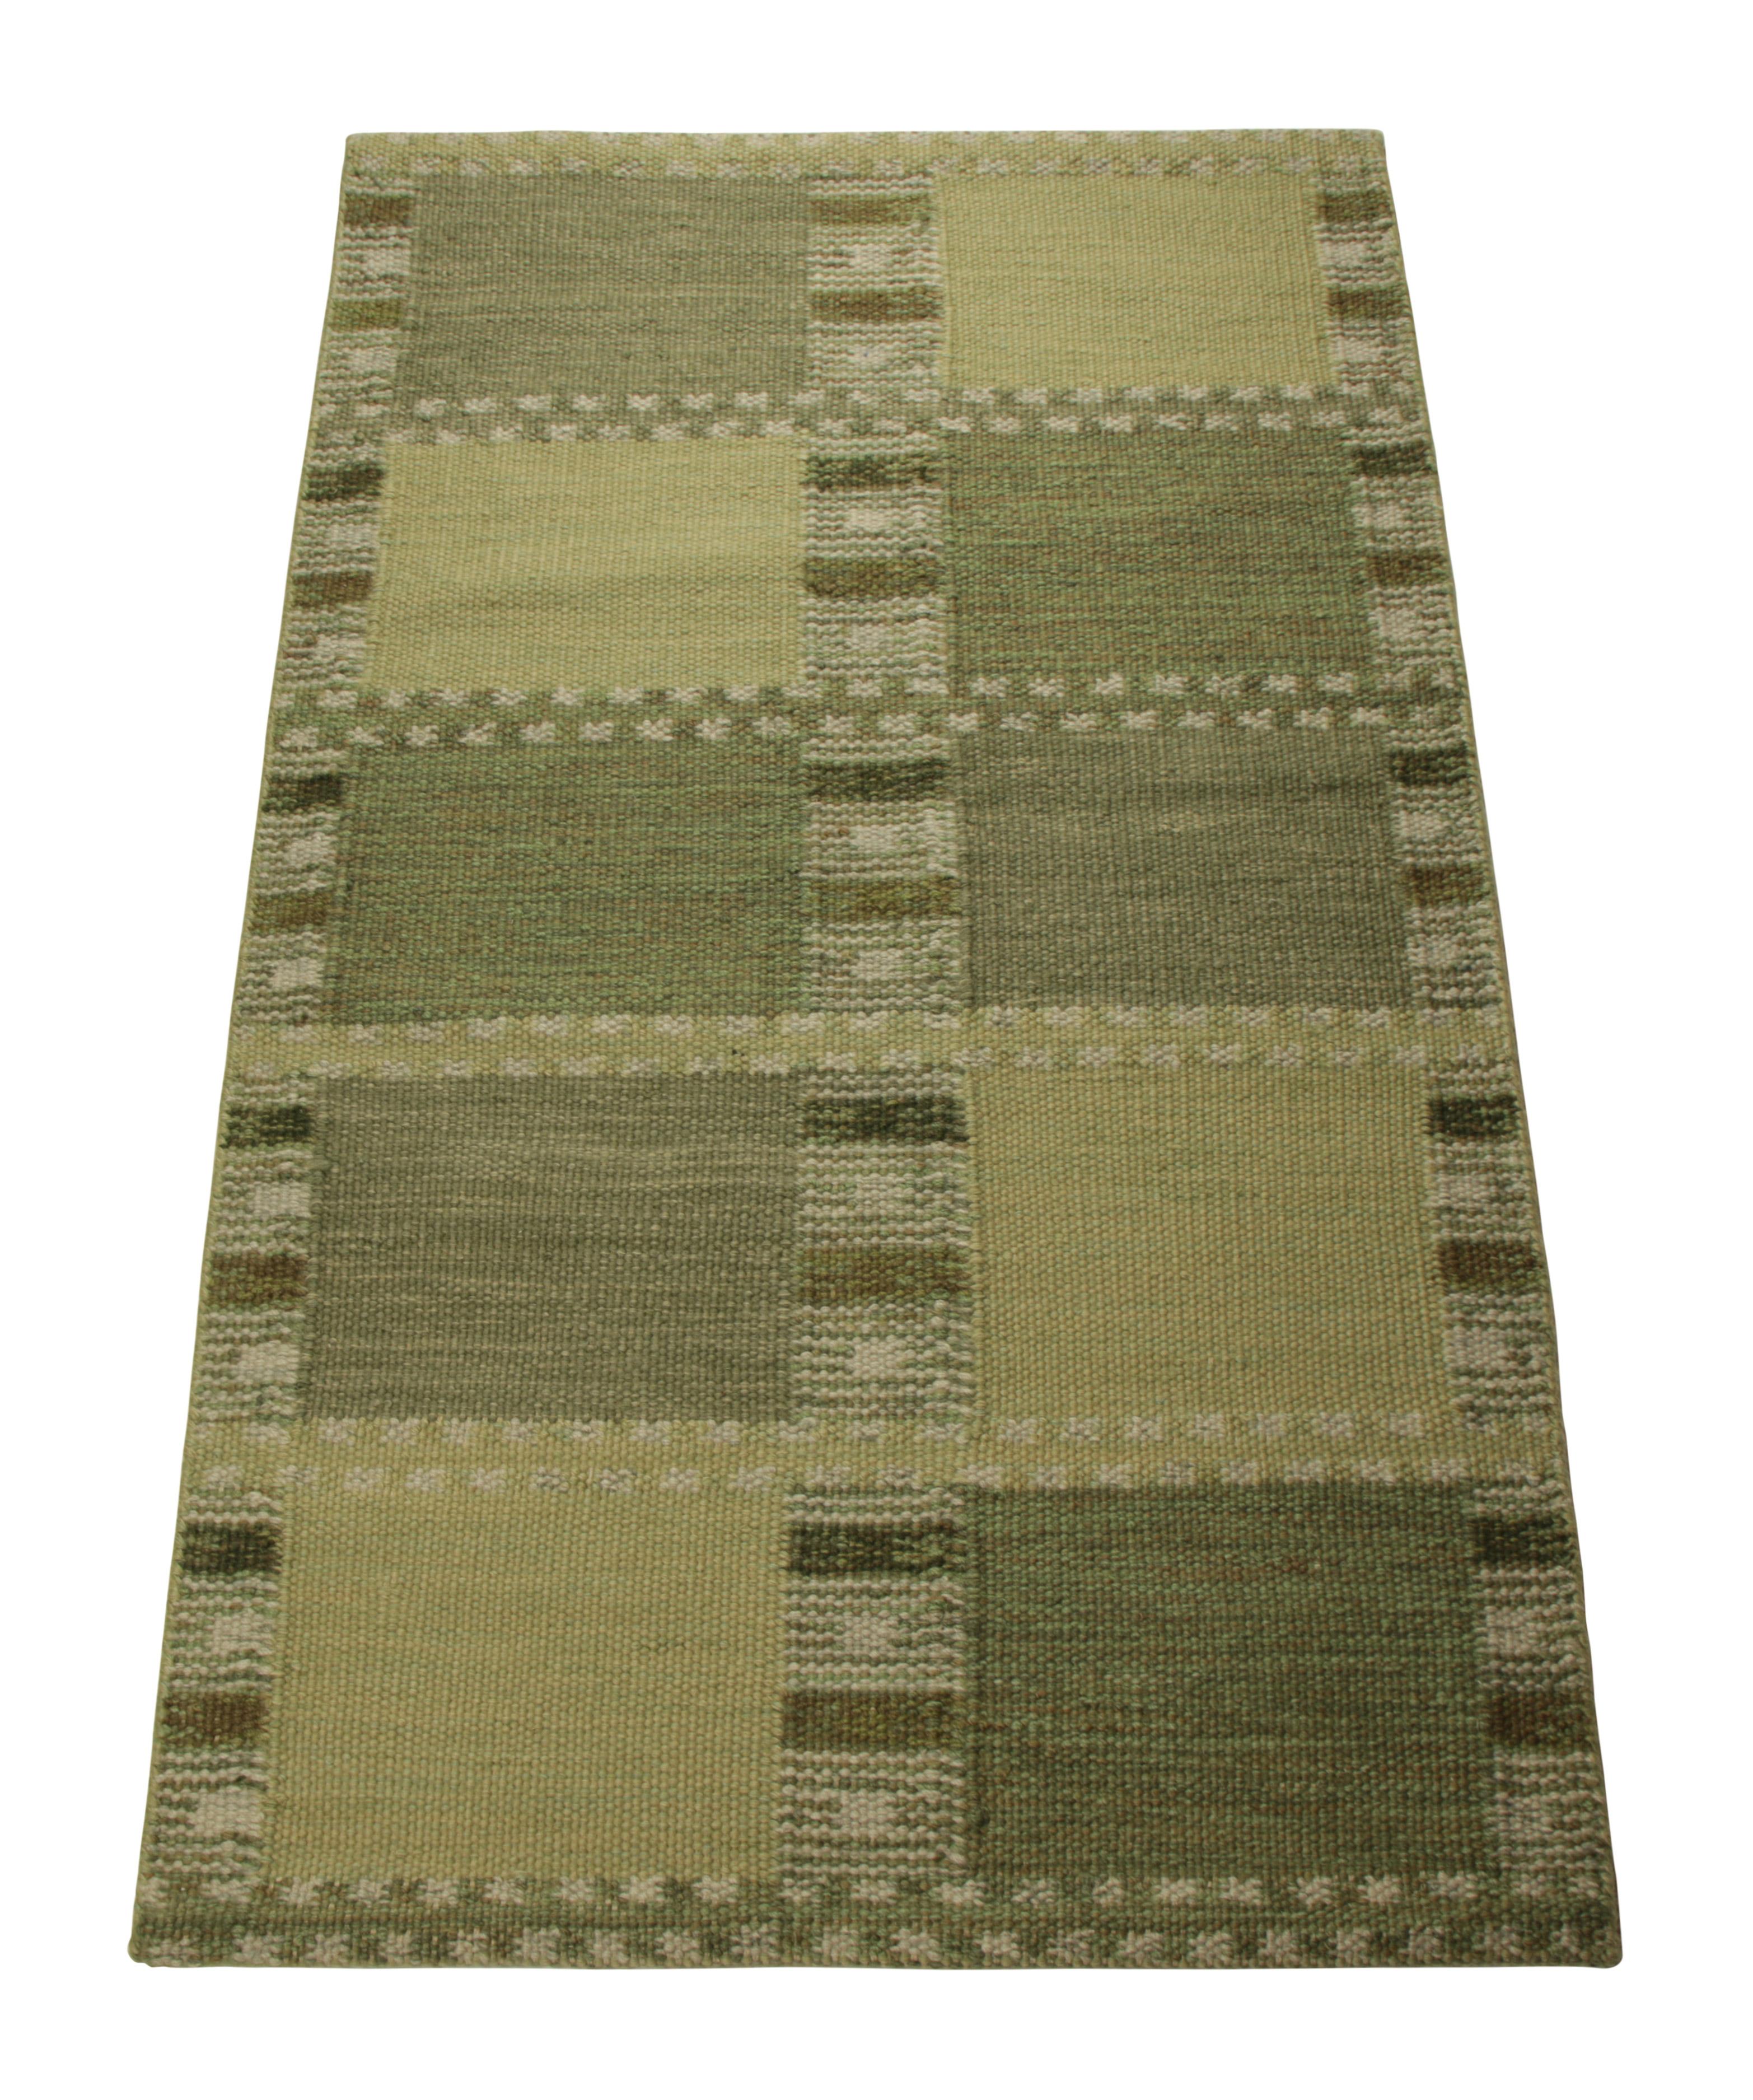 Indian Rug & Kilim’s Scandinavian Style Rug in Green, with Geometric Patterns For Sale